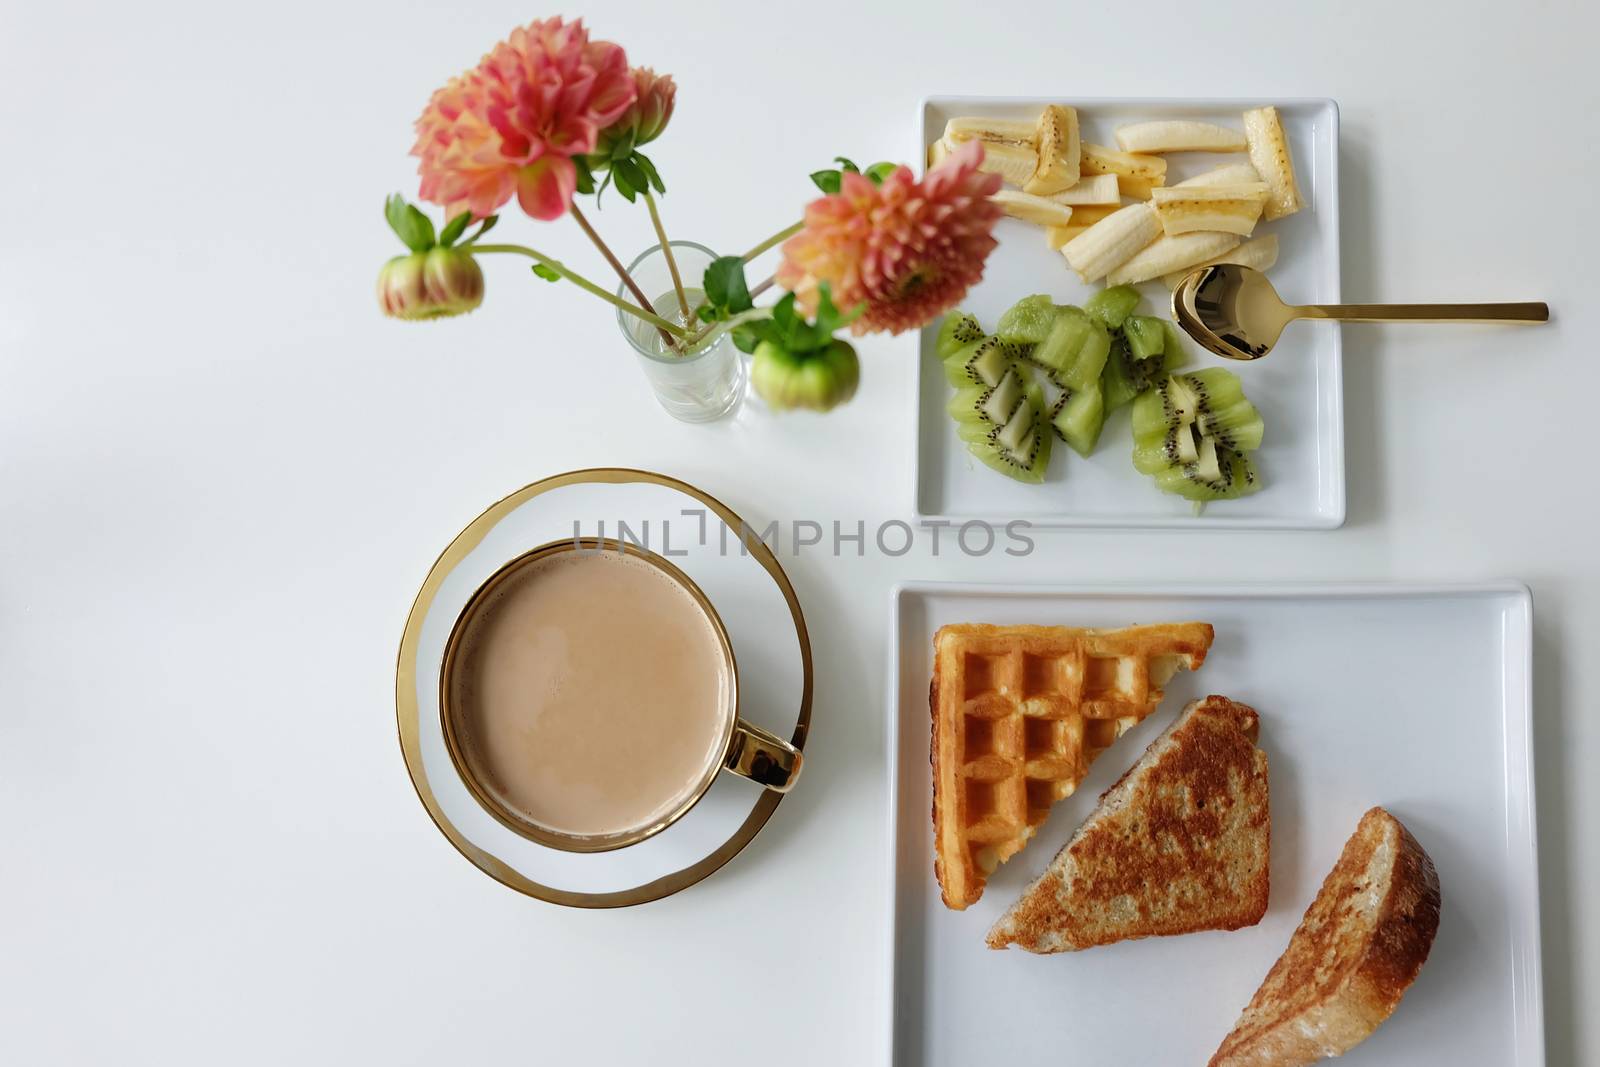 Waffles, Frech toast, Fruit and latte with flowers and gold spoon on white table ware